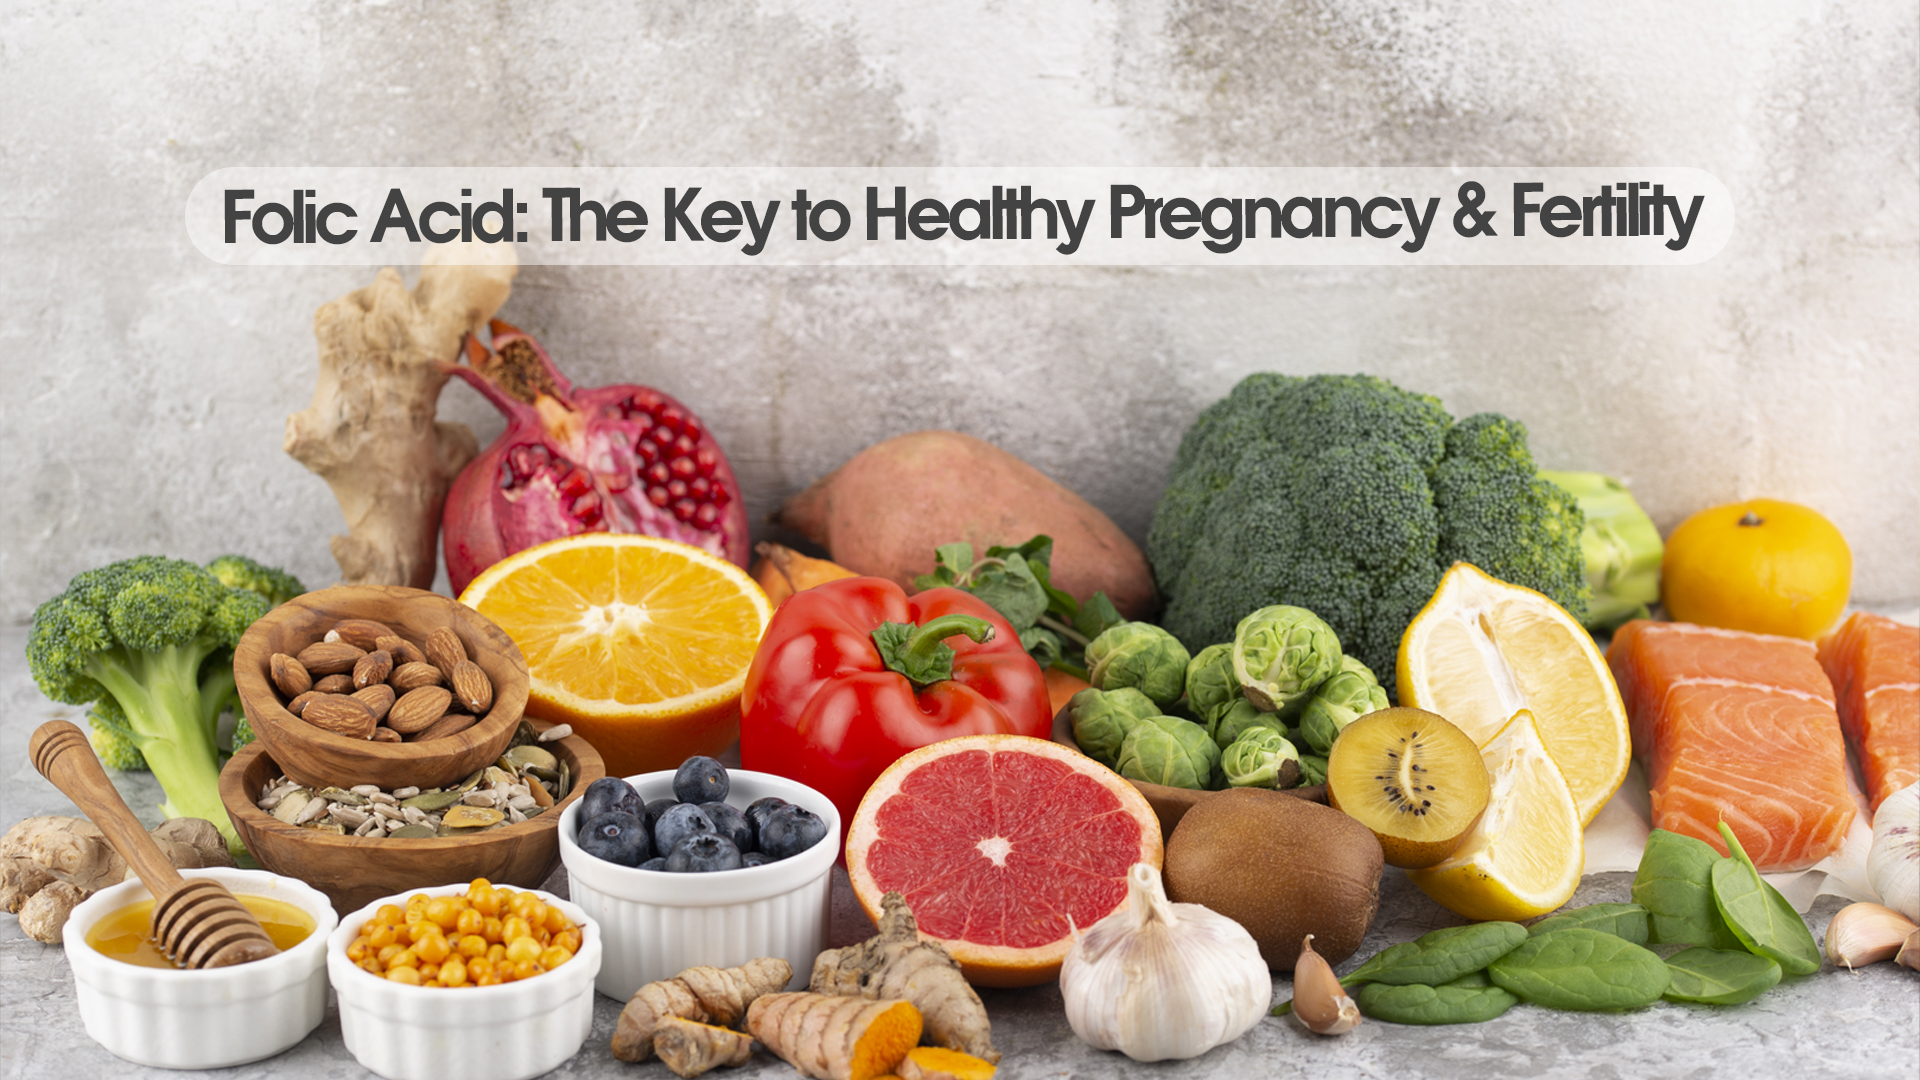 THE VITAL ROLE OF FOLIC ACID IN PREGNANCY AND FERTILITY